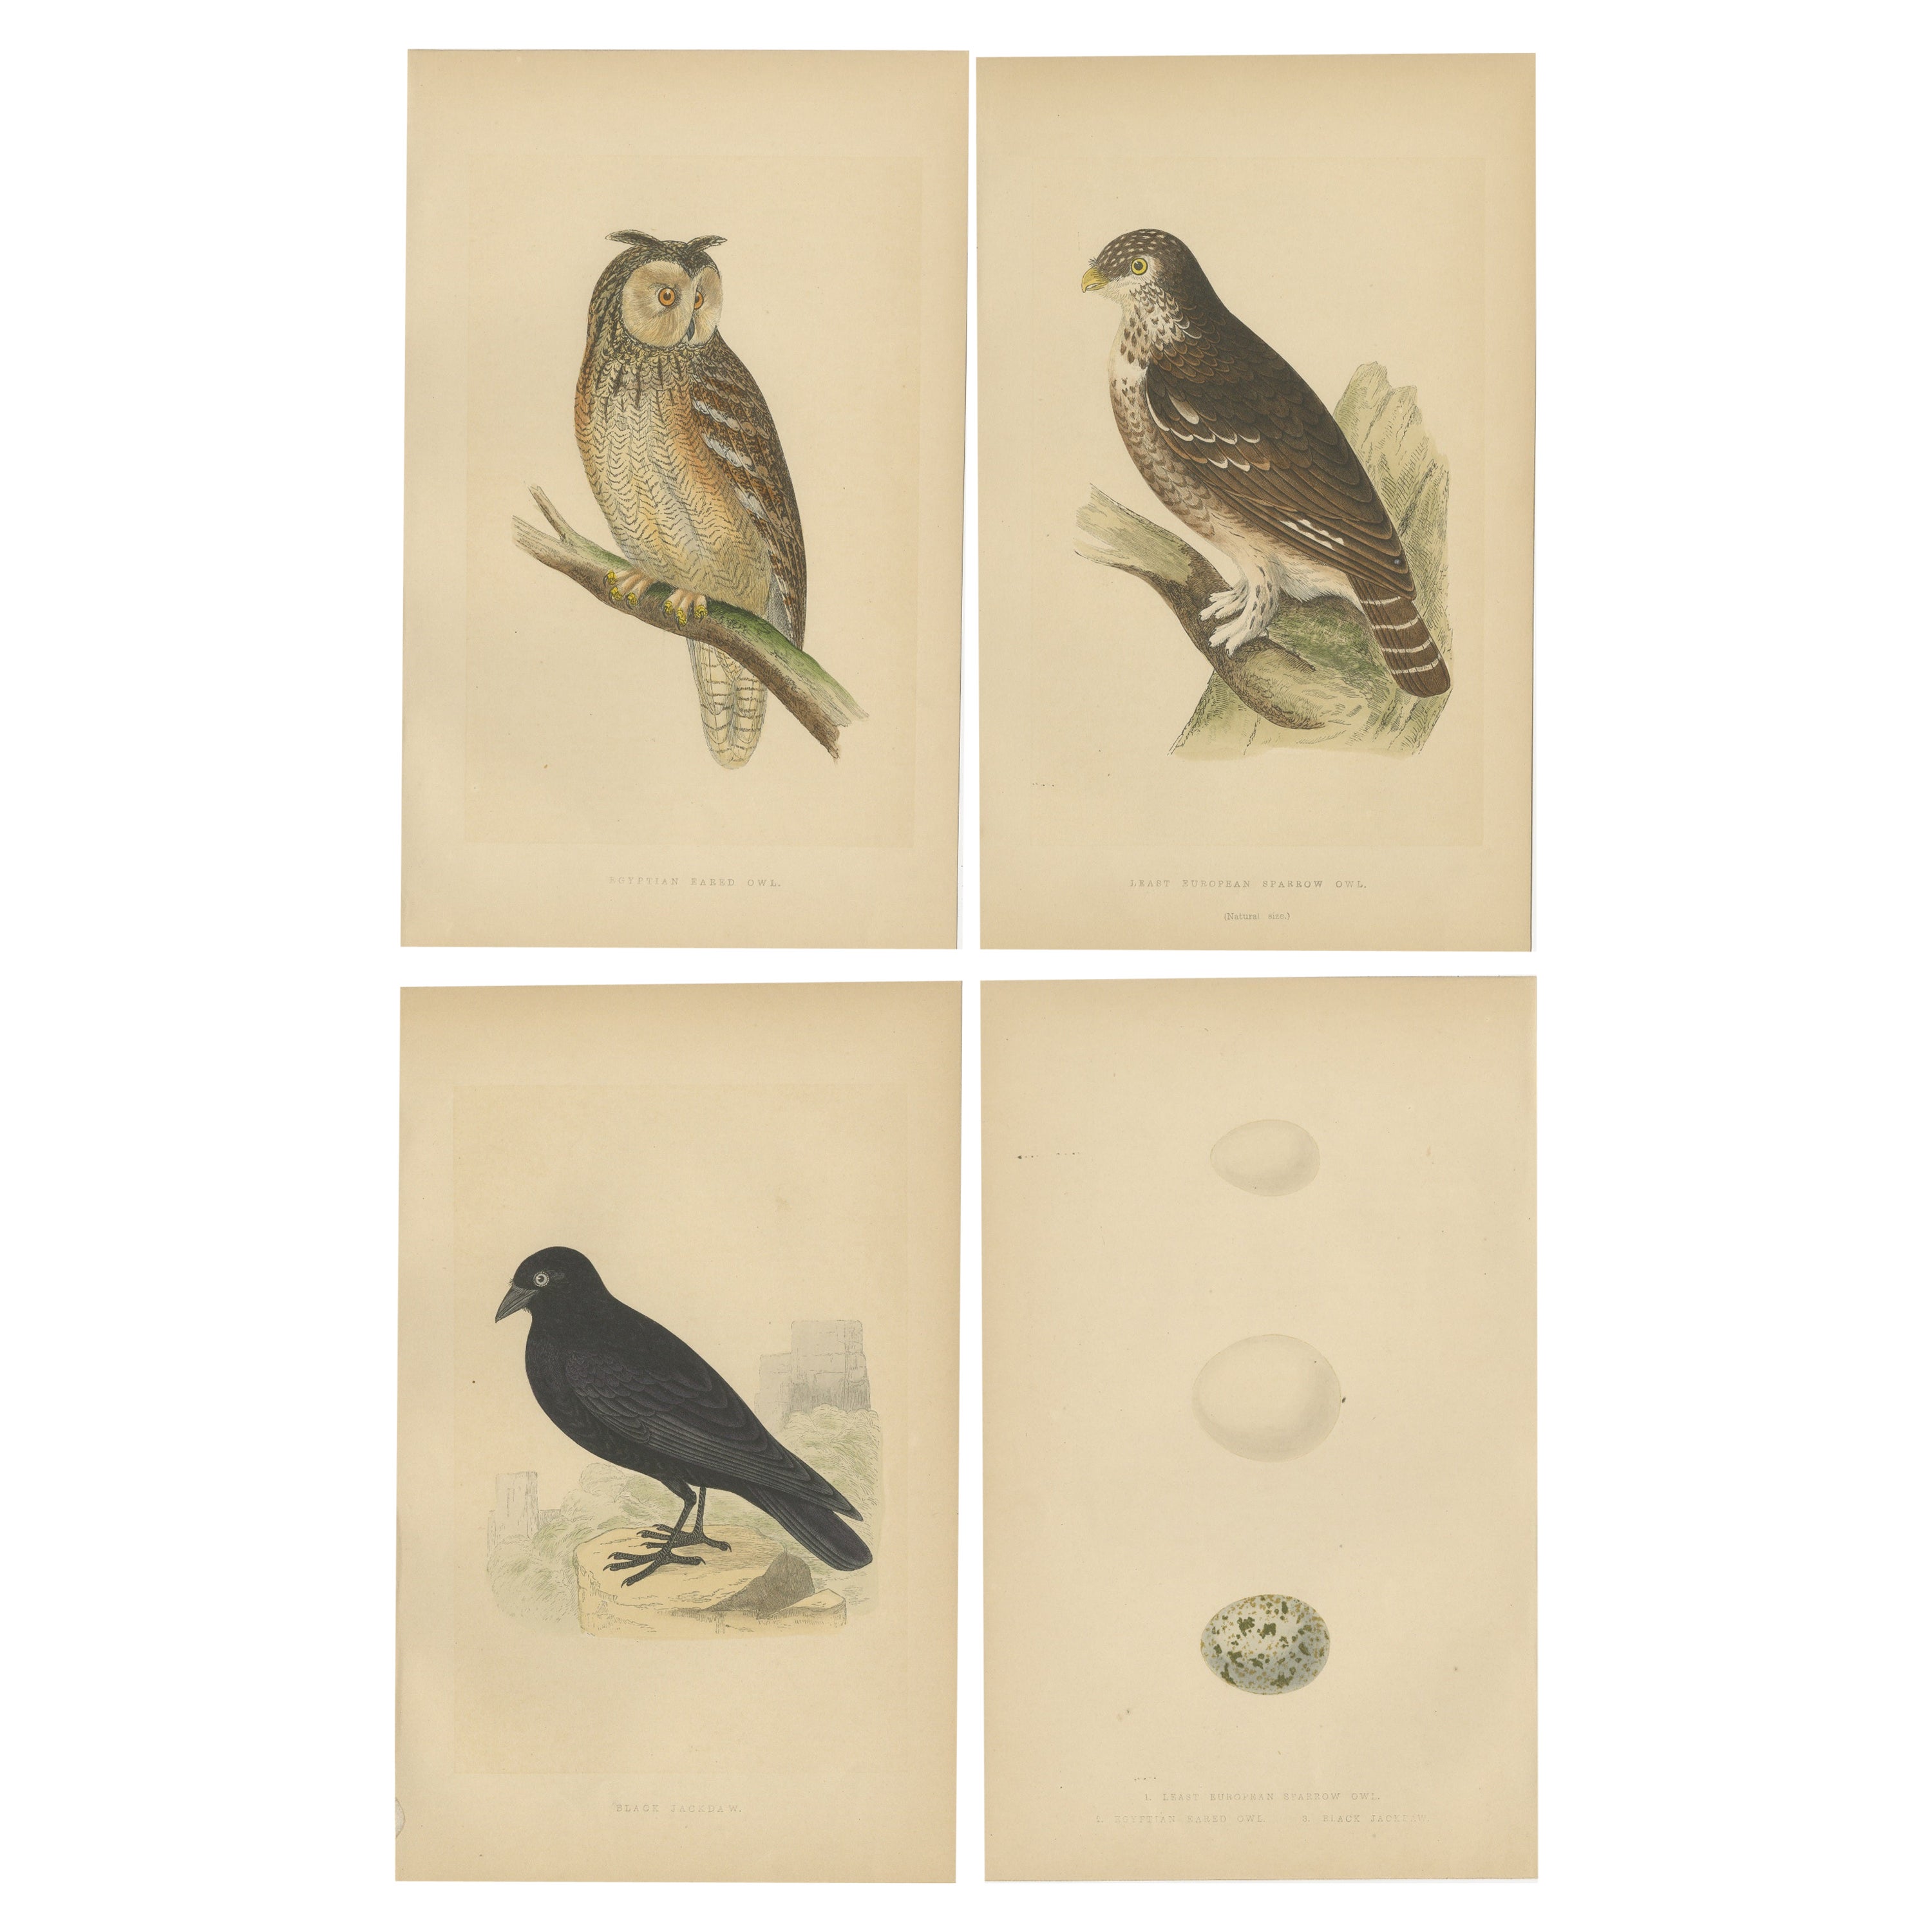 Set of 4 Antique Bird Prints of Two Owls, a Black Jackdaw and Their Eggs